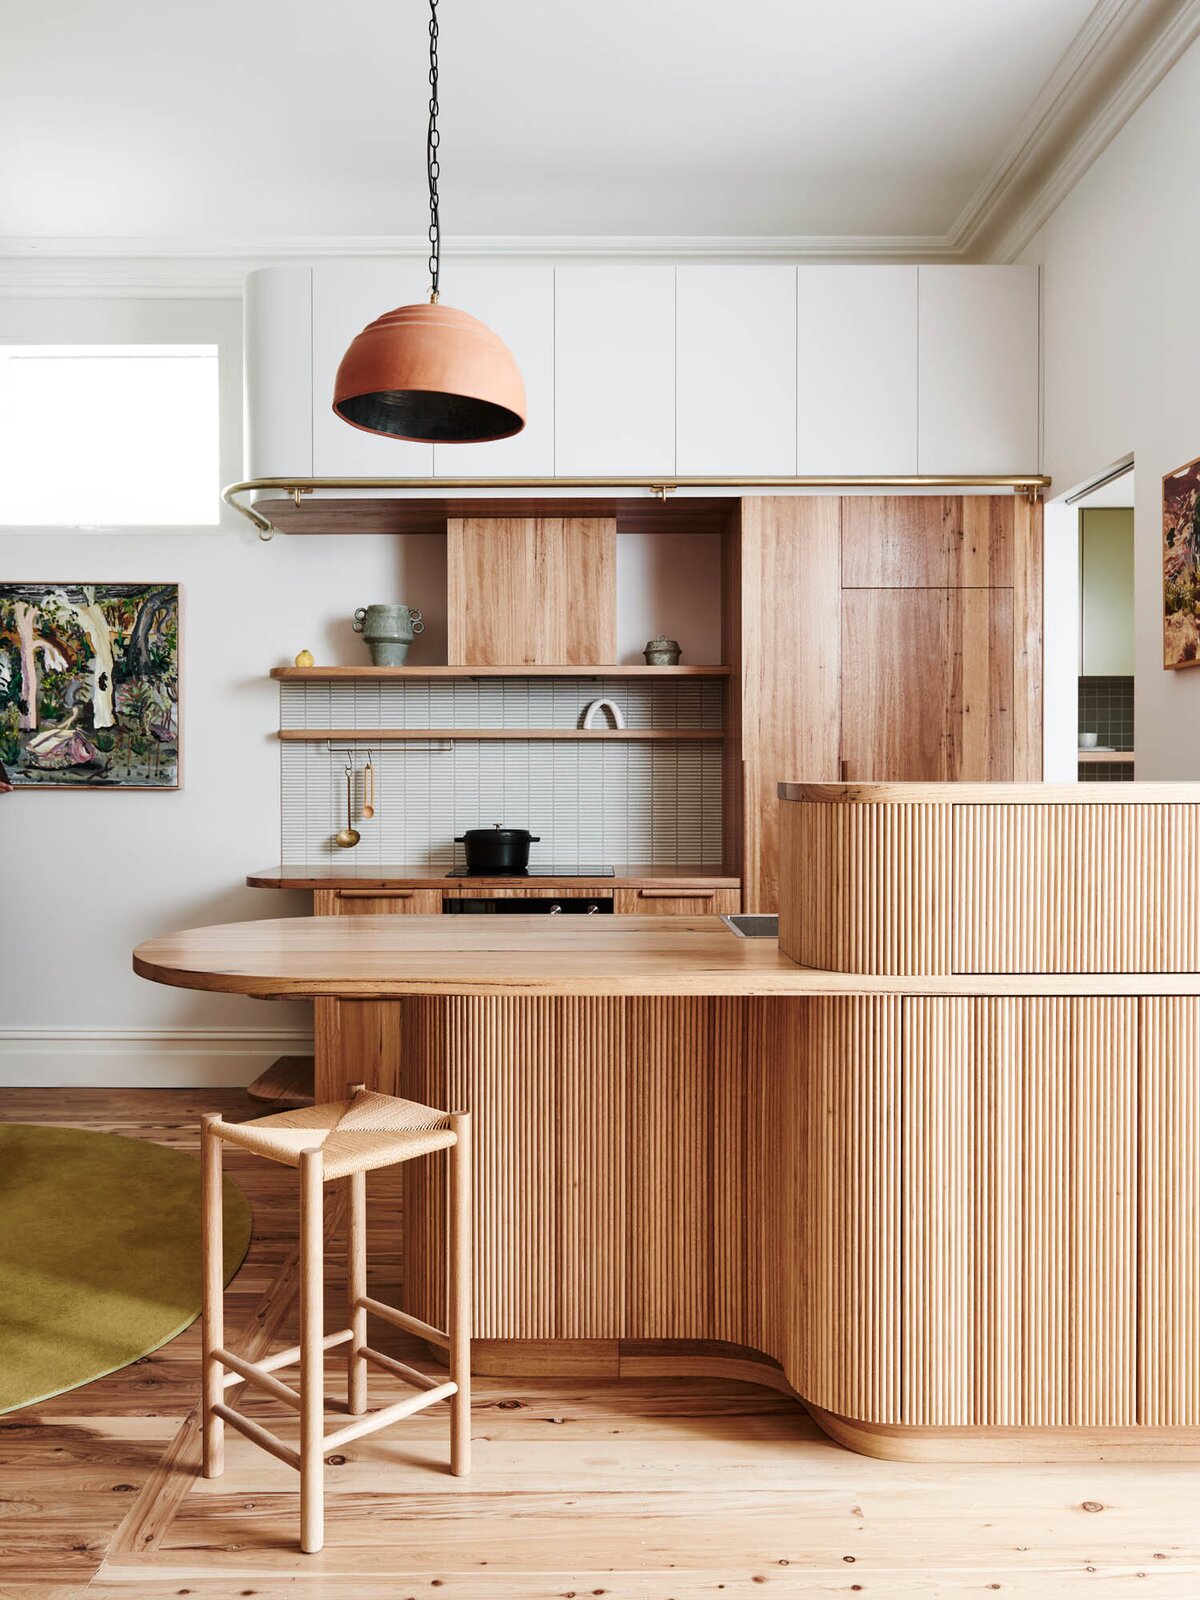 A Cramped Melbourne Victorian Gets an Earthy Refresh Inspired by the Australian Bush